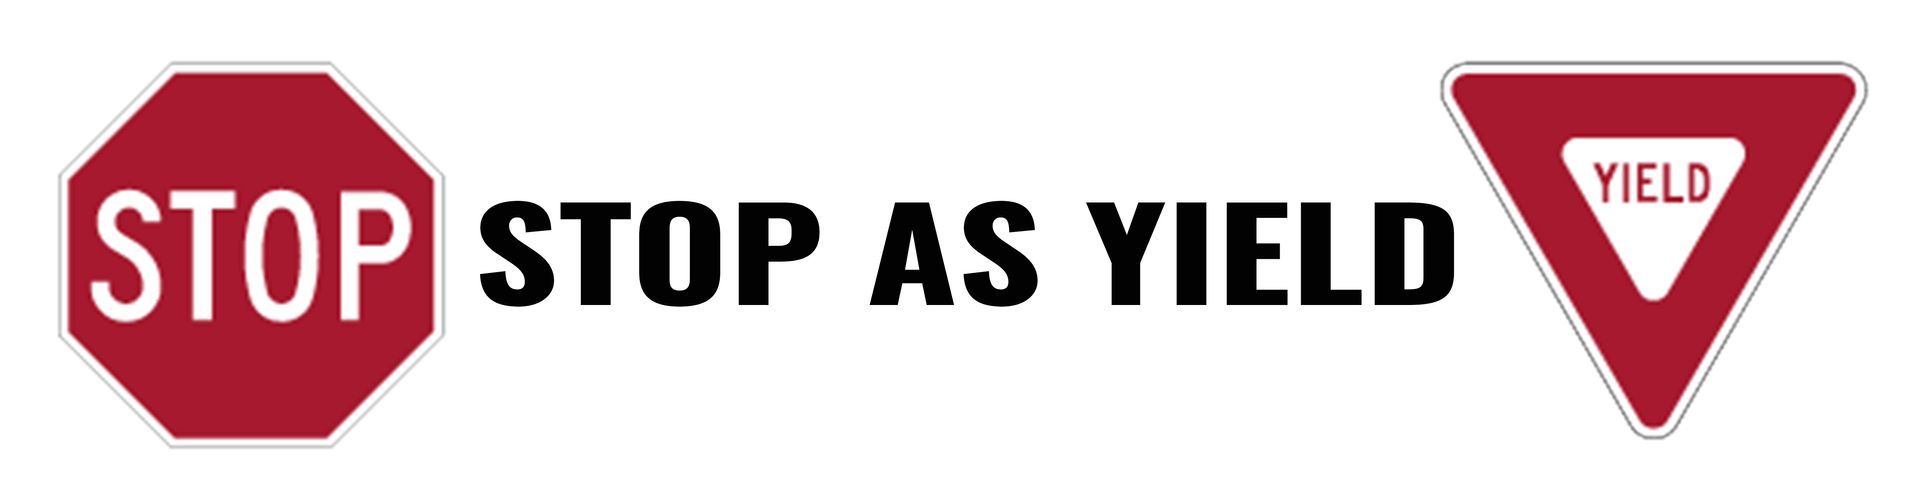 stop as yield